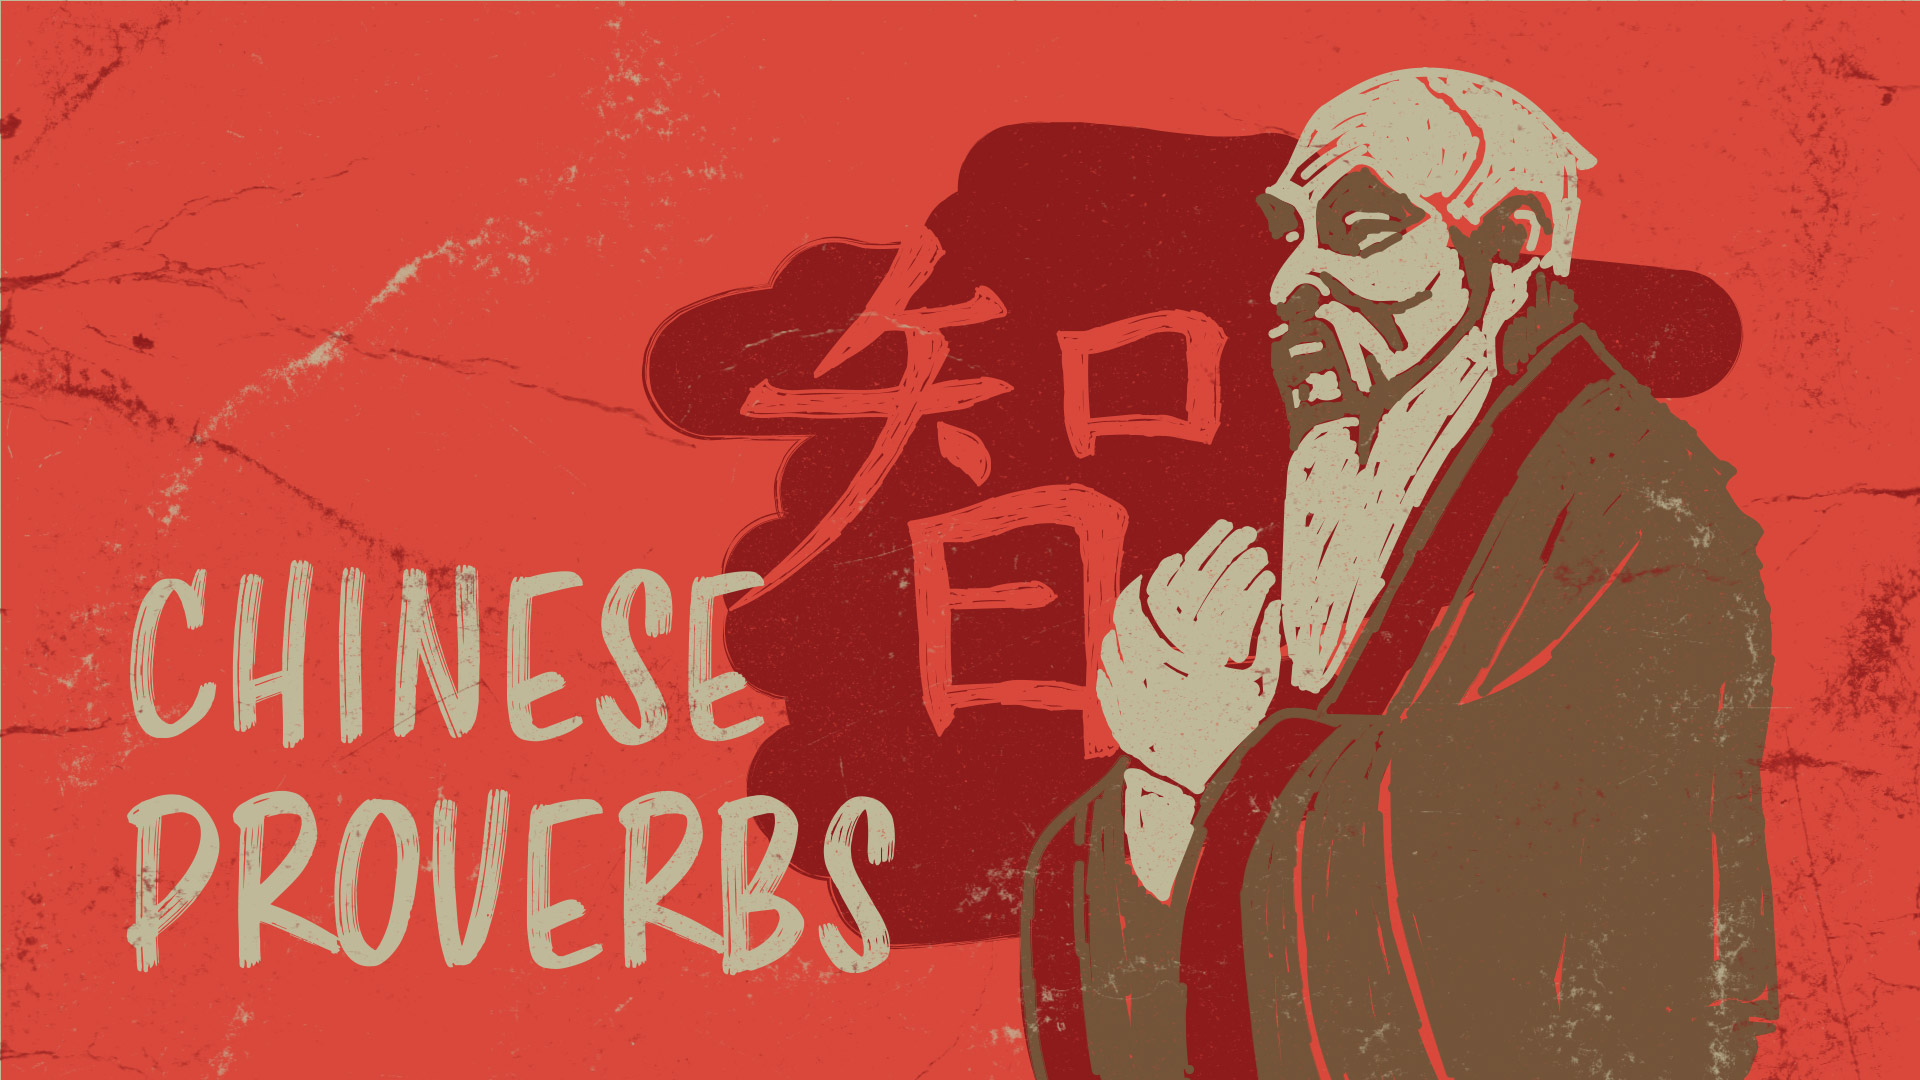 chinese proverbs about wisdom